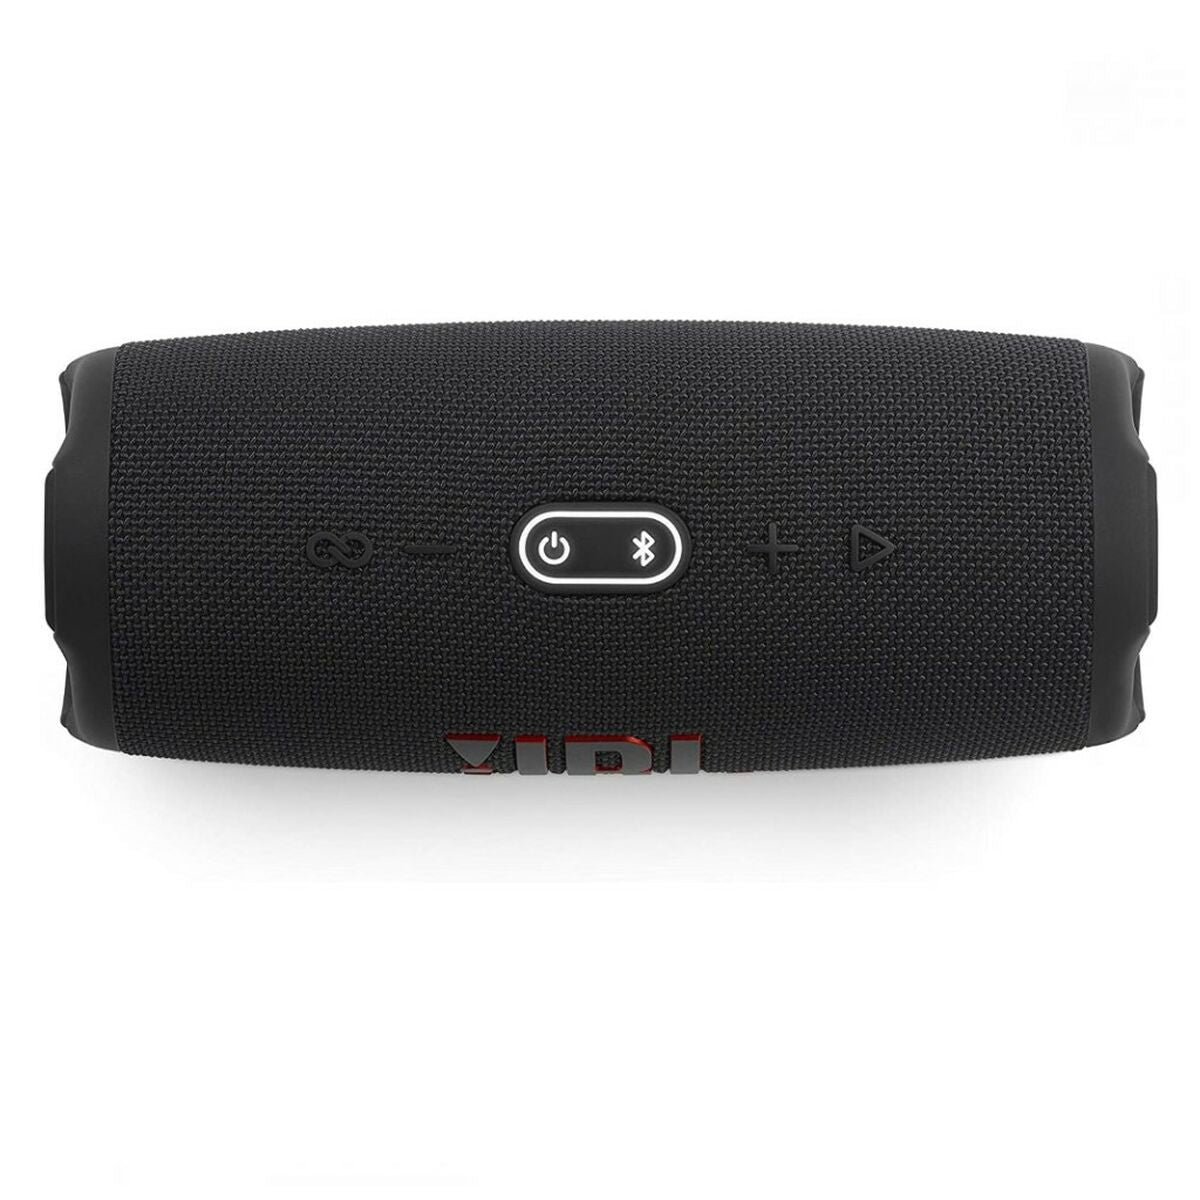 Portable Bluetooth Speakers JBL Black, JBL, Electronics, Mobile communication and accessories, portable-bluetooth-speakers-jbl-black, Brand_JBL, category-reference-2609, category-reference-2882, category-reference-2923, category-reference-t-19653, category-reference-t-21311, category-reference-t-25527, category-reference-t-4036, category-reference-t-4037, Condition_NEW, entertainment, music, Price_200 - 300, telephones & tablets, wifi y bluetooth, RiotNook